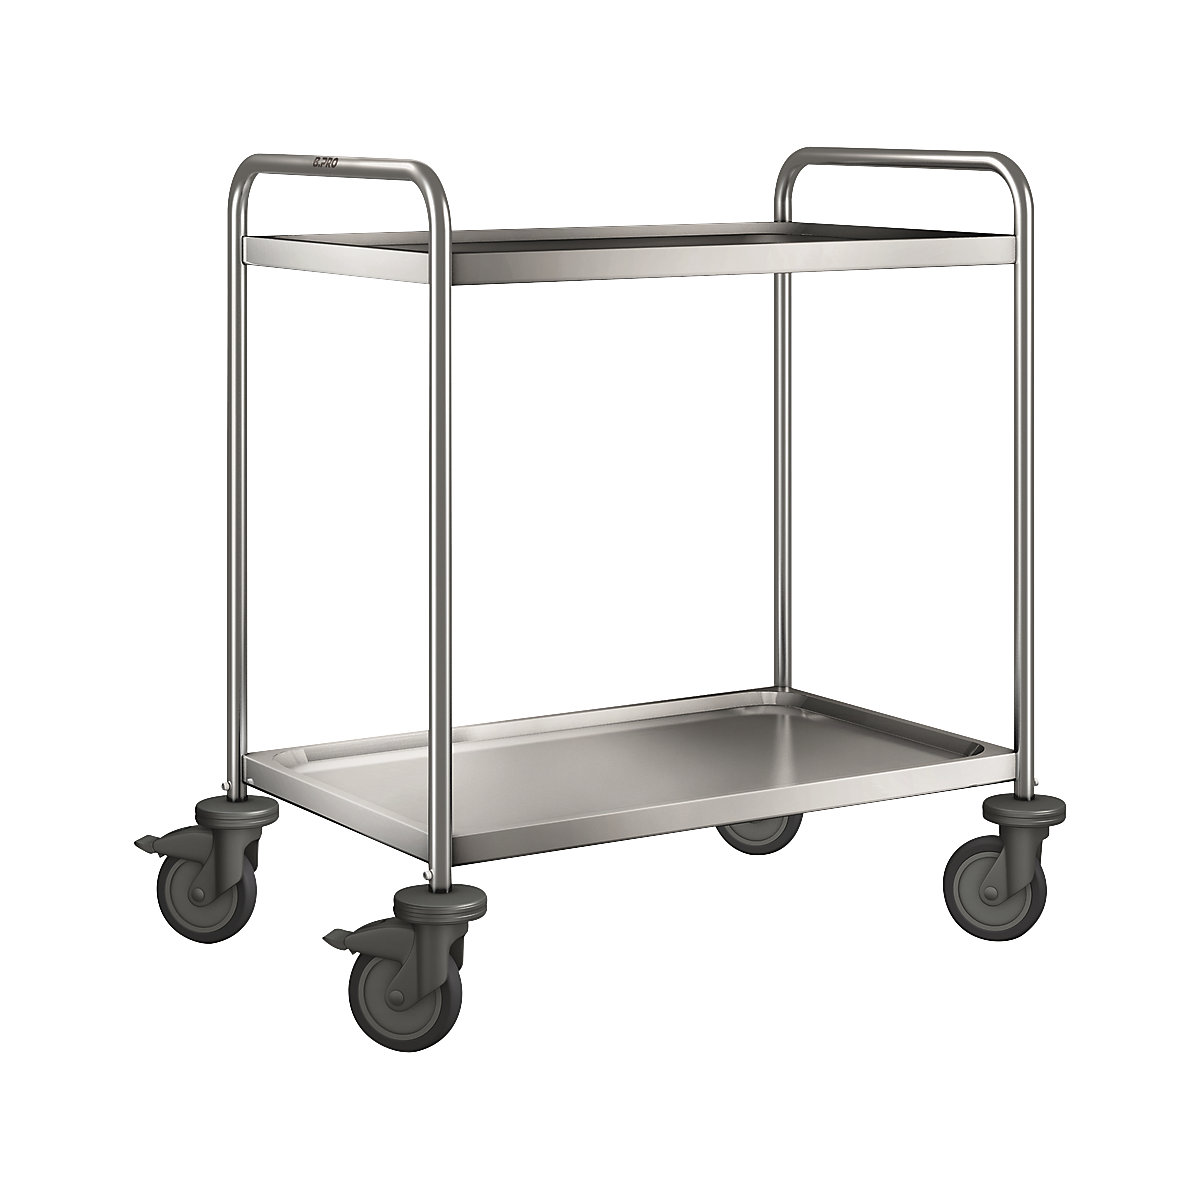 BLANCO stainless steel serving trolley – B.PRO, with 2 shelves, LxWxH 900 x 600 x 950 mm-1